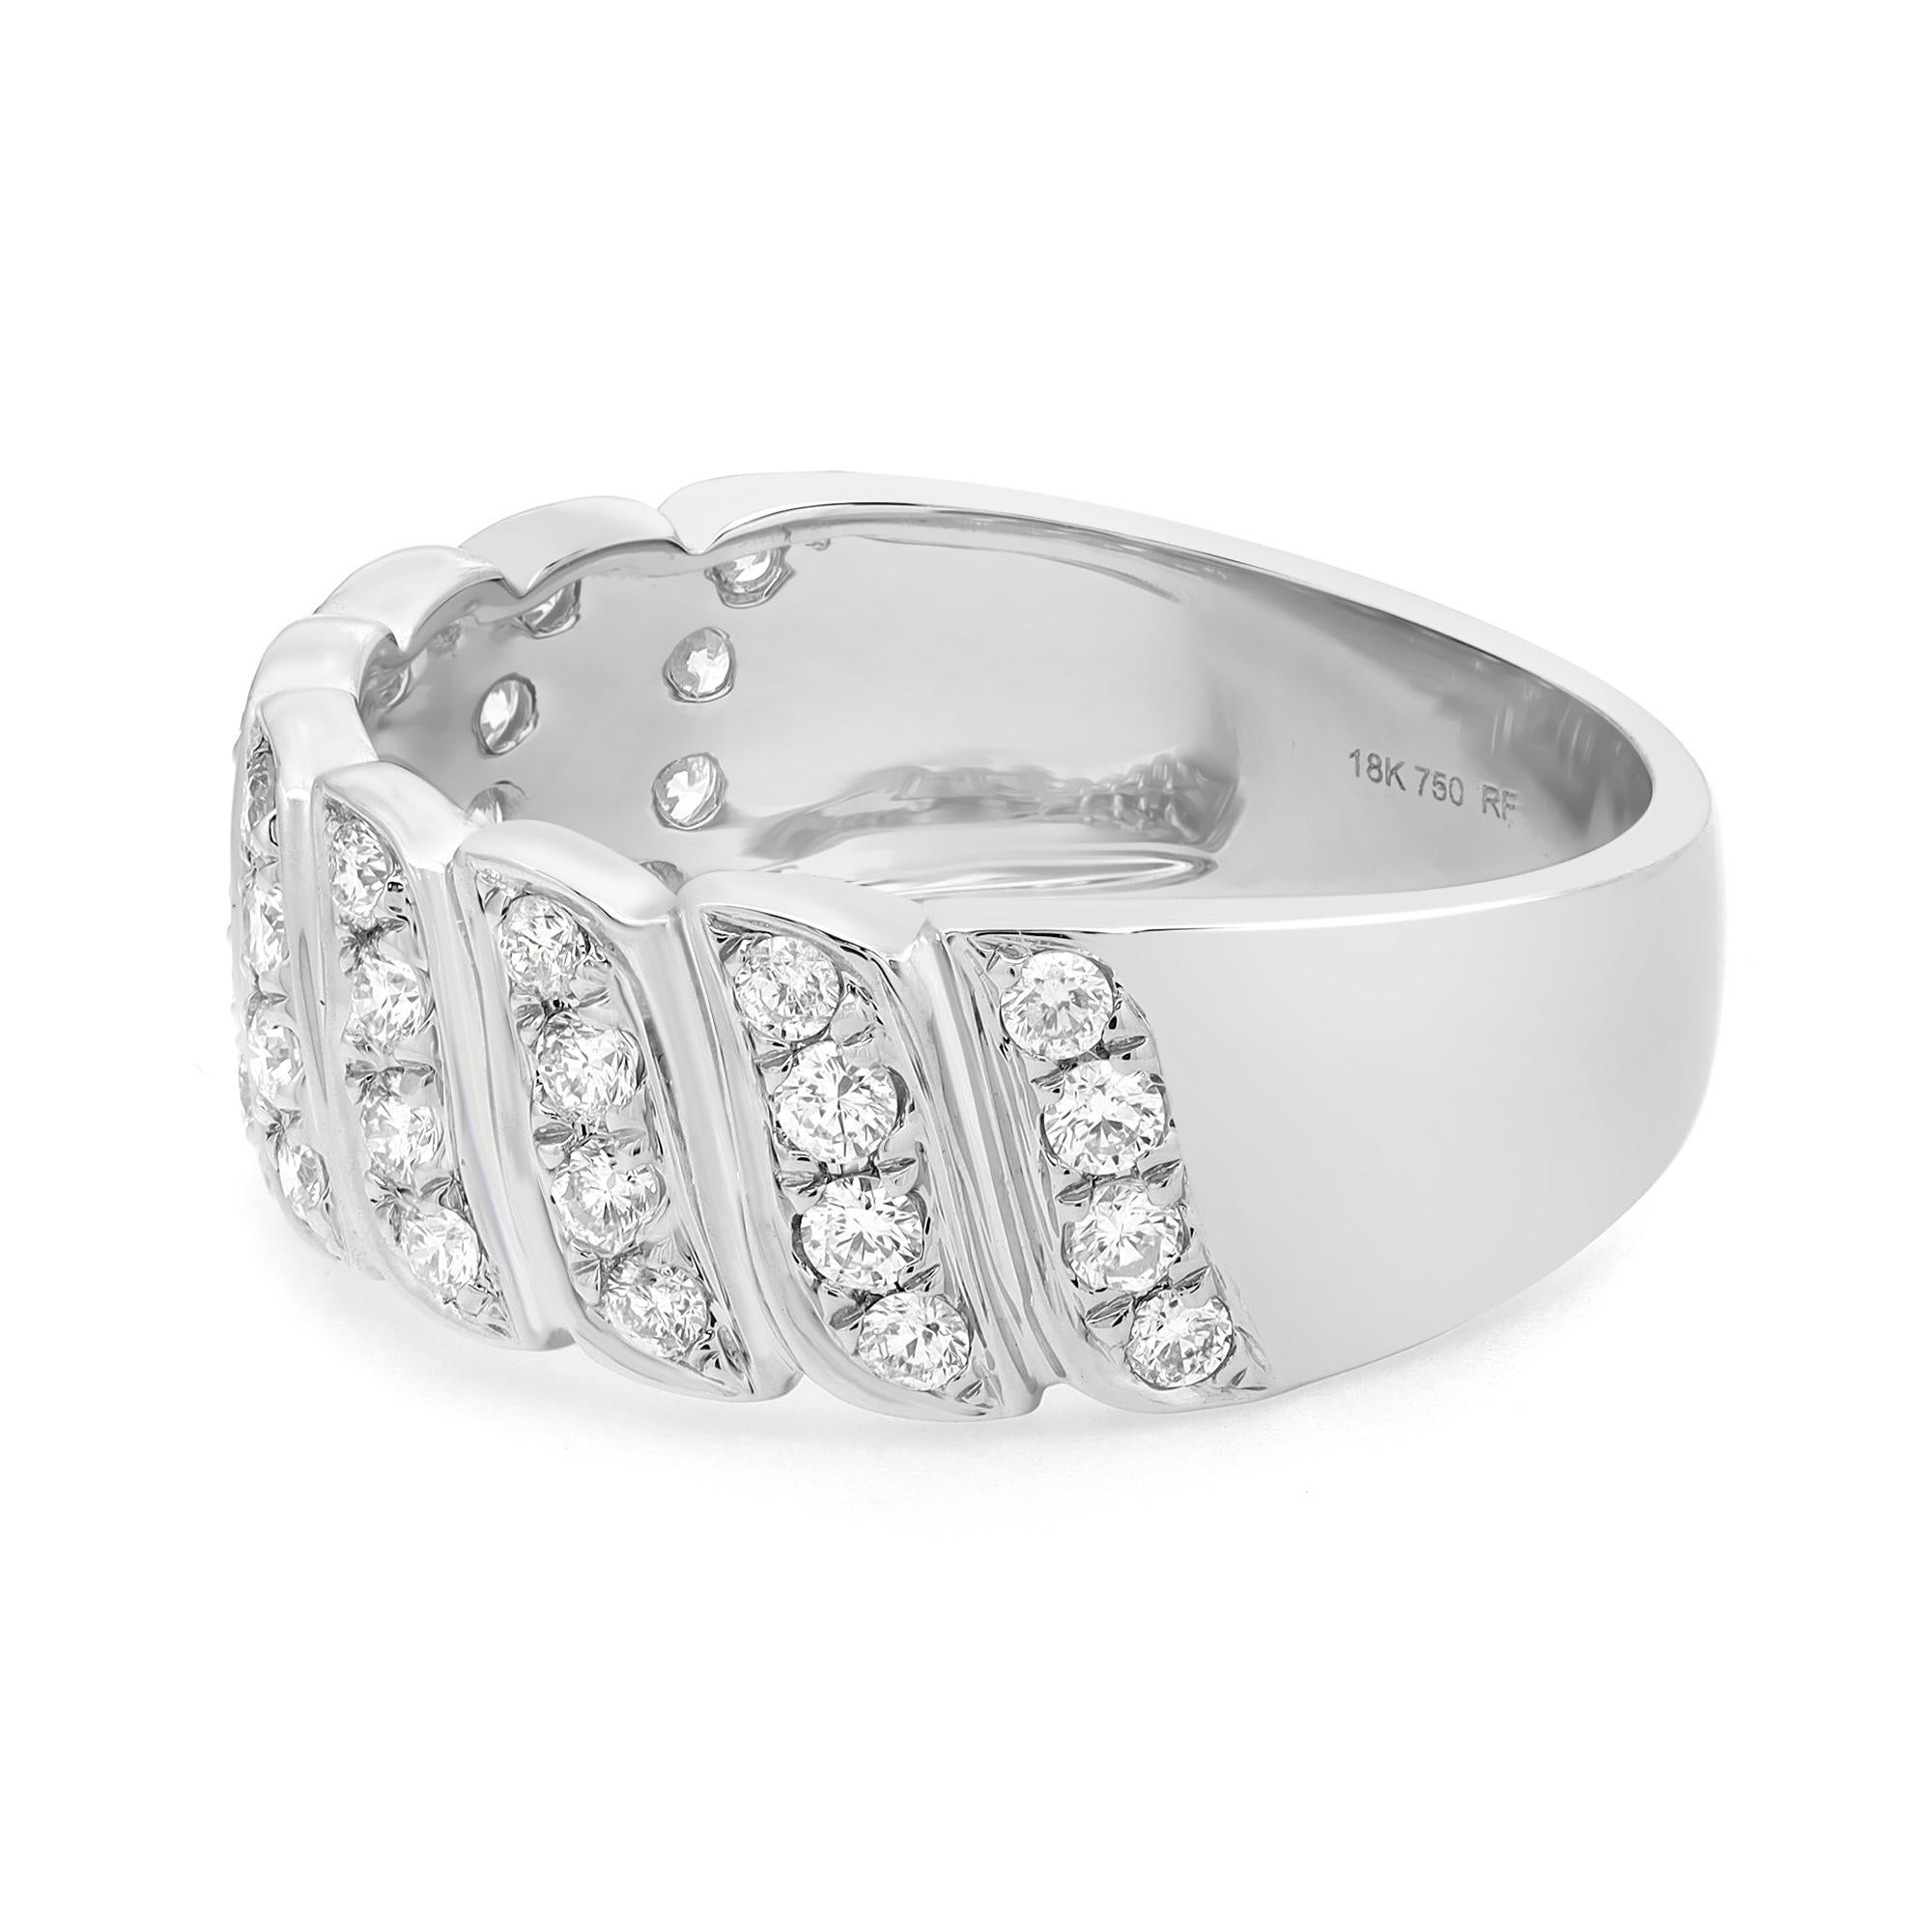 Rachel Koen 0.52cttw Round Cut Diamond Band Ring 18K White Gold In New Condition For Sale In New York, NY